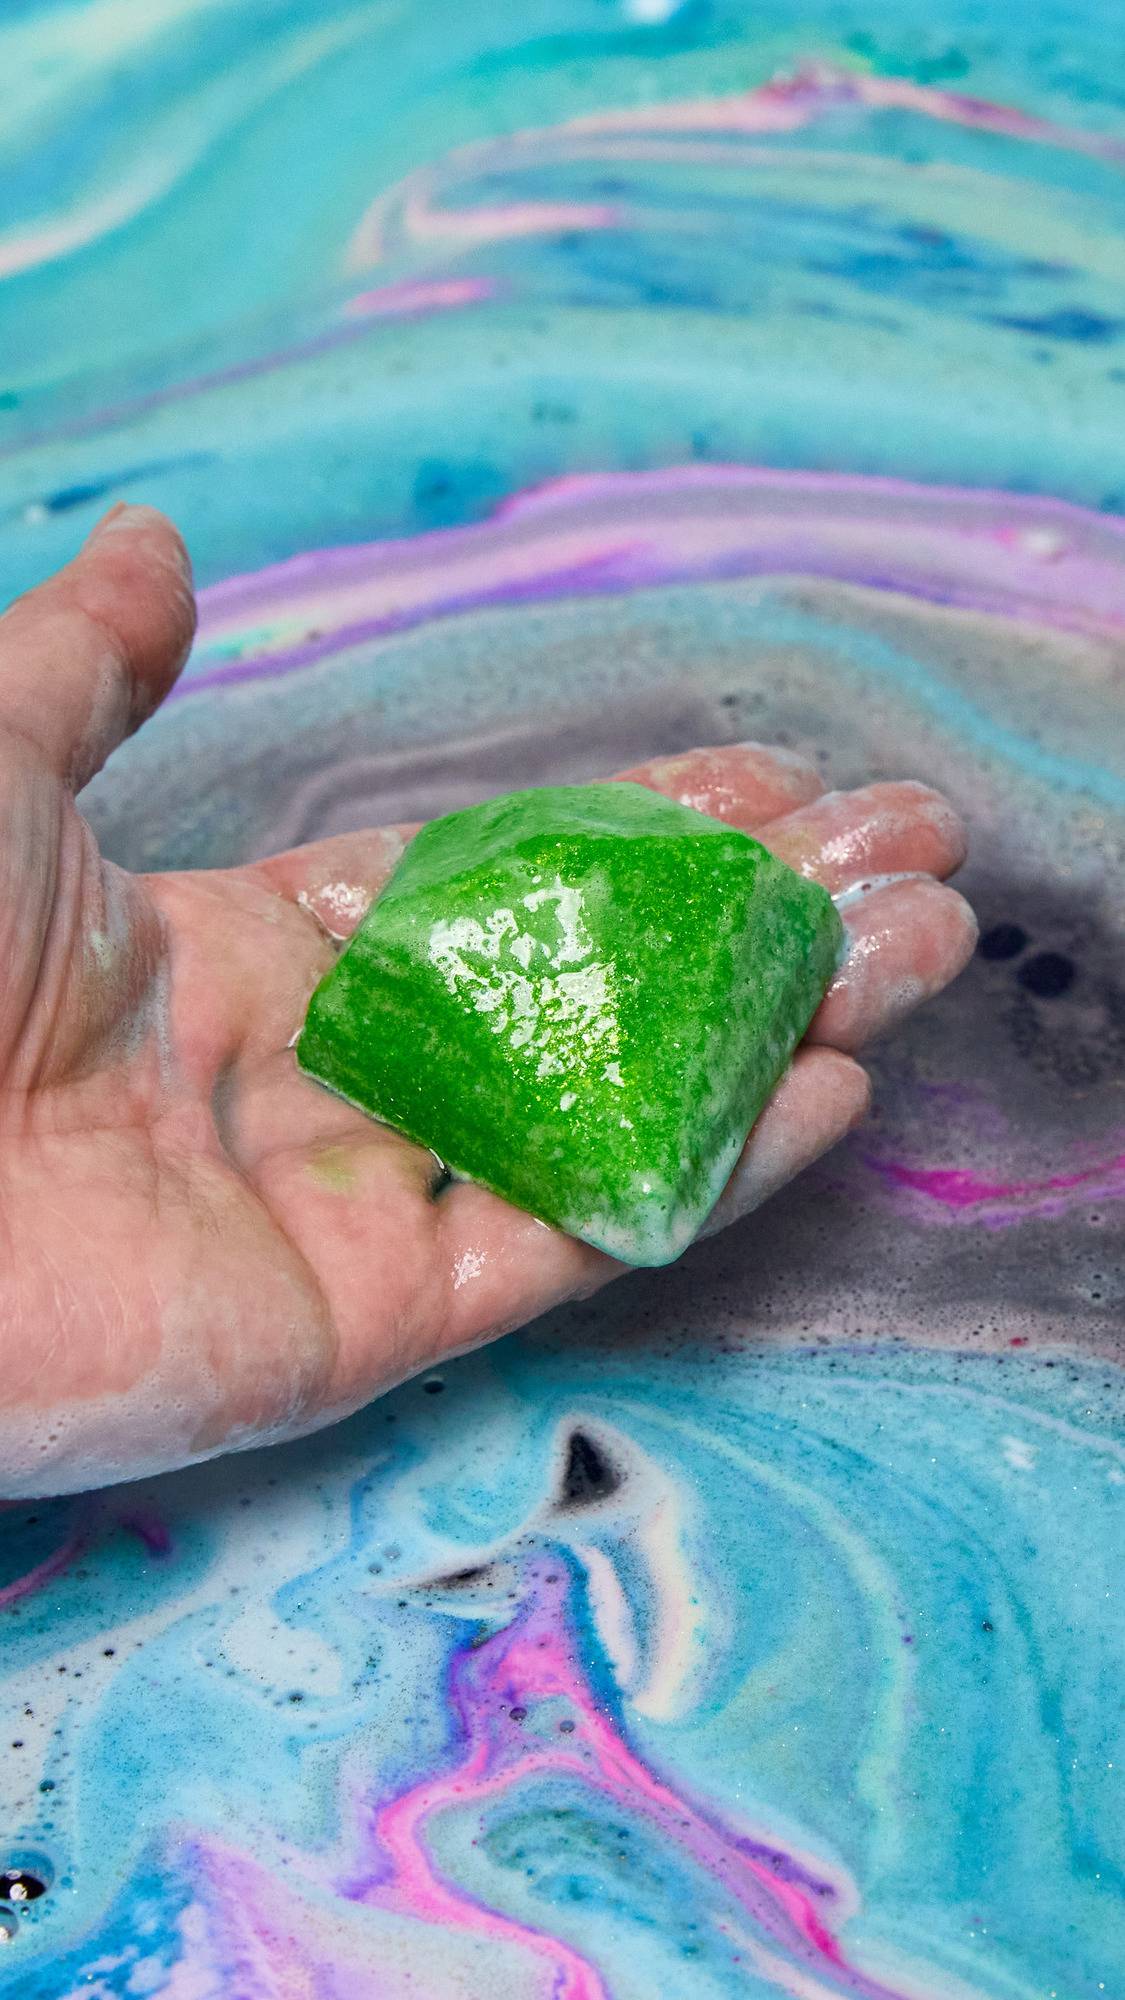 The Giant Intergalactic bath bomb has fully dissolved leaving behind colourful swirls of foamy water as the model holds a surprise, green diamond-shaped soap gift in the centre. 